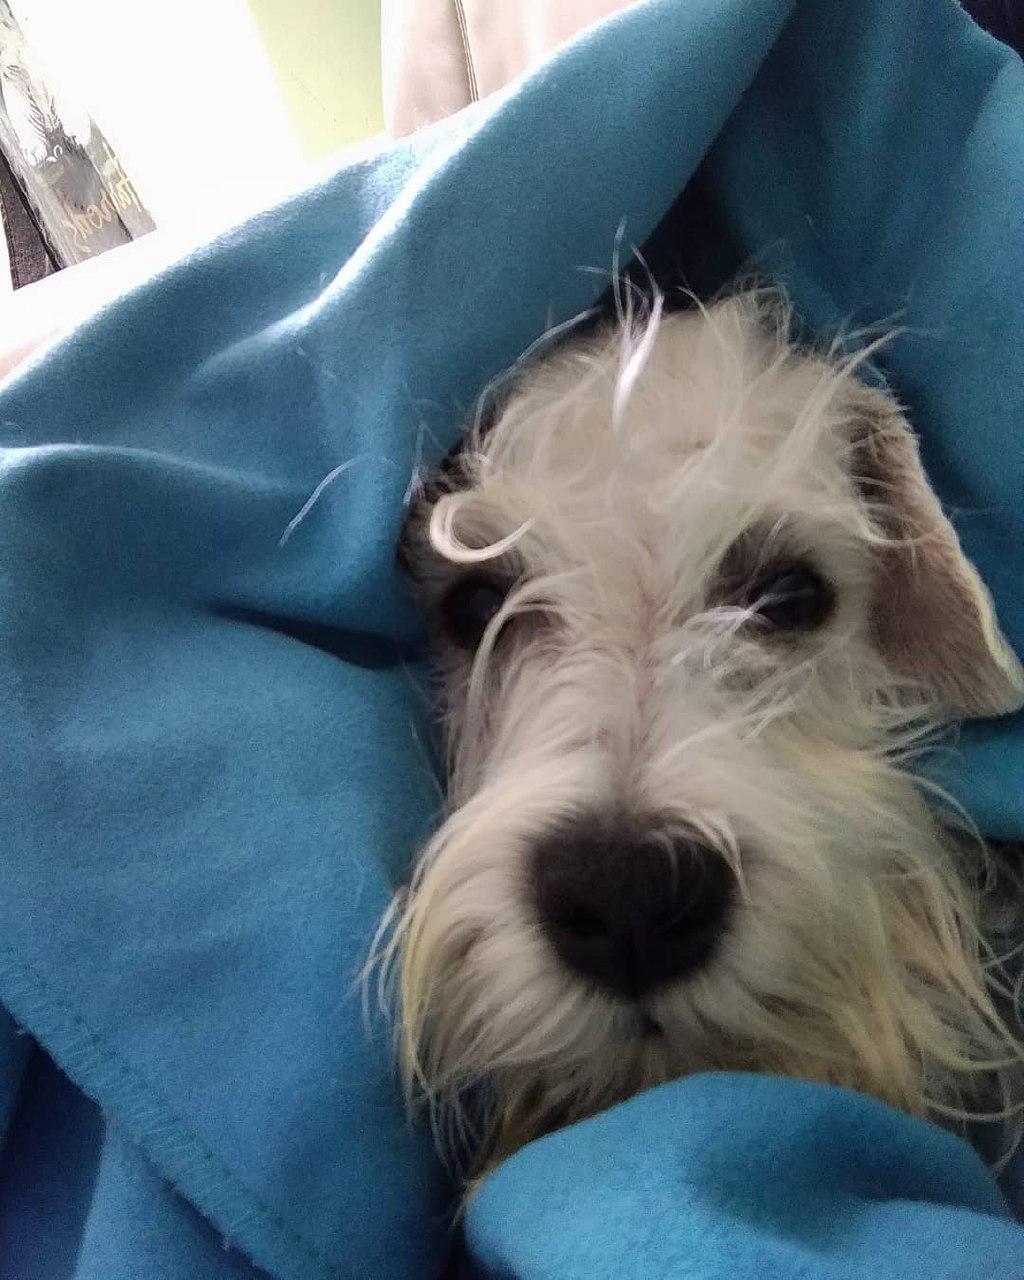 a Schnauzer under the blanket with only showing its face